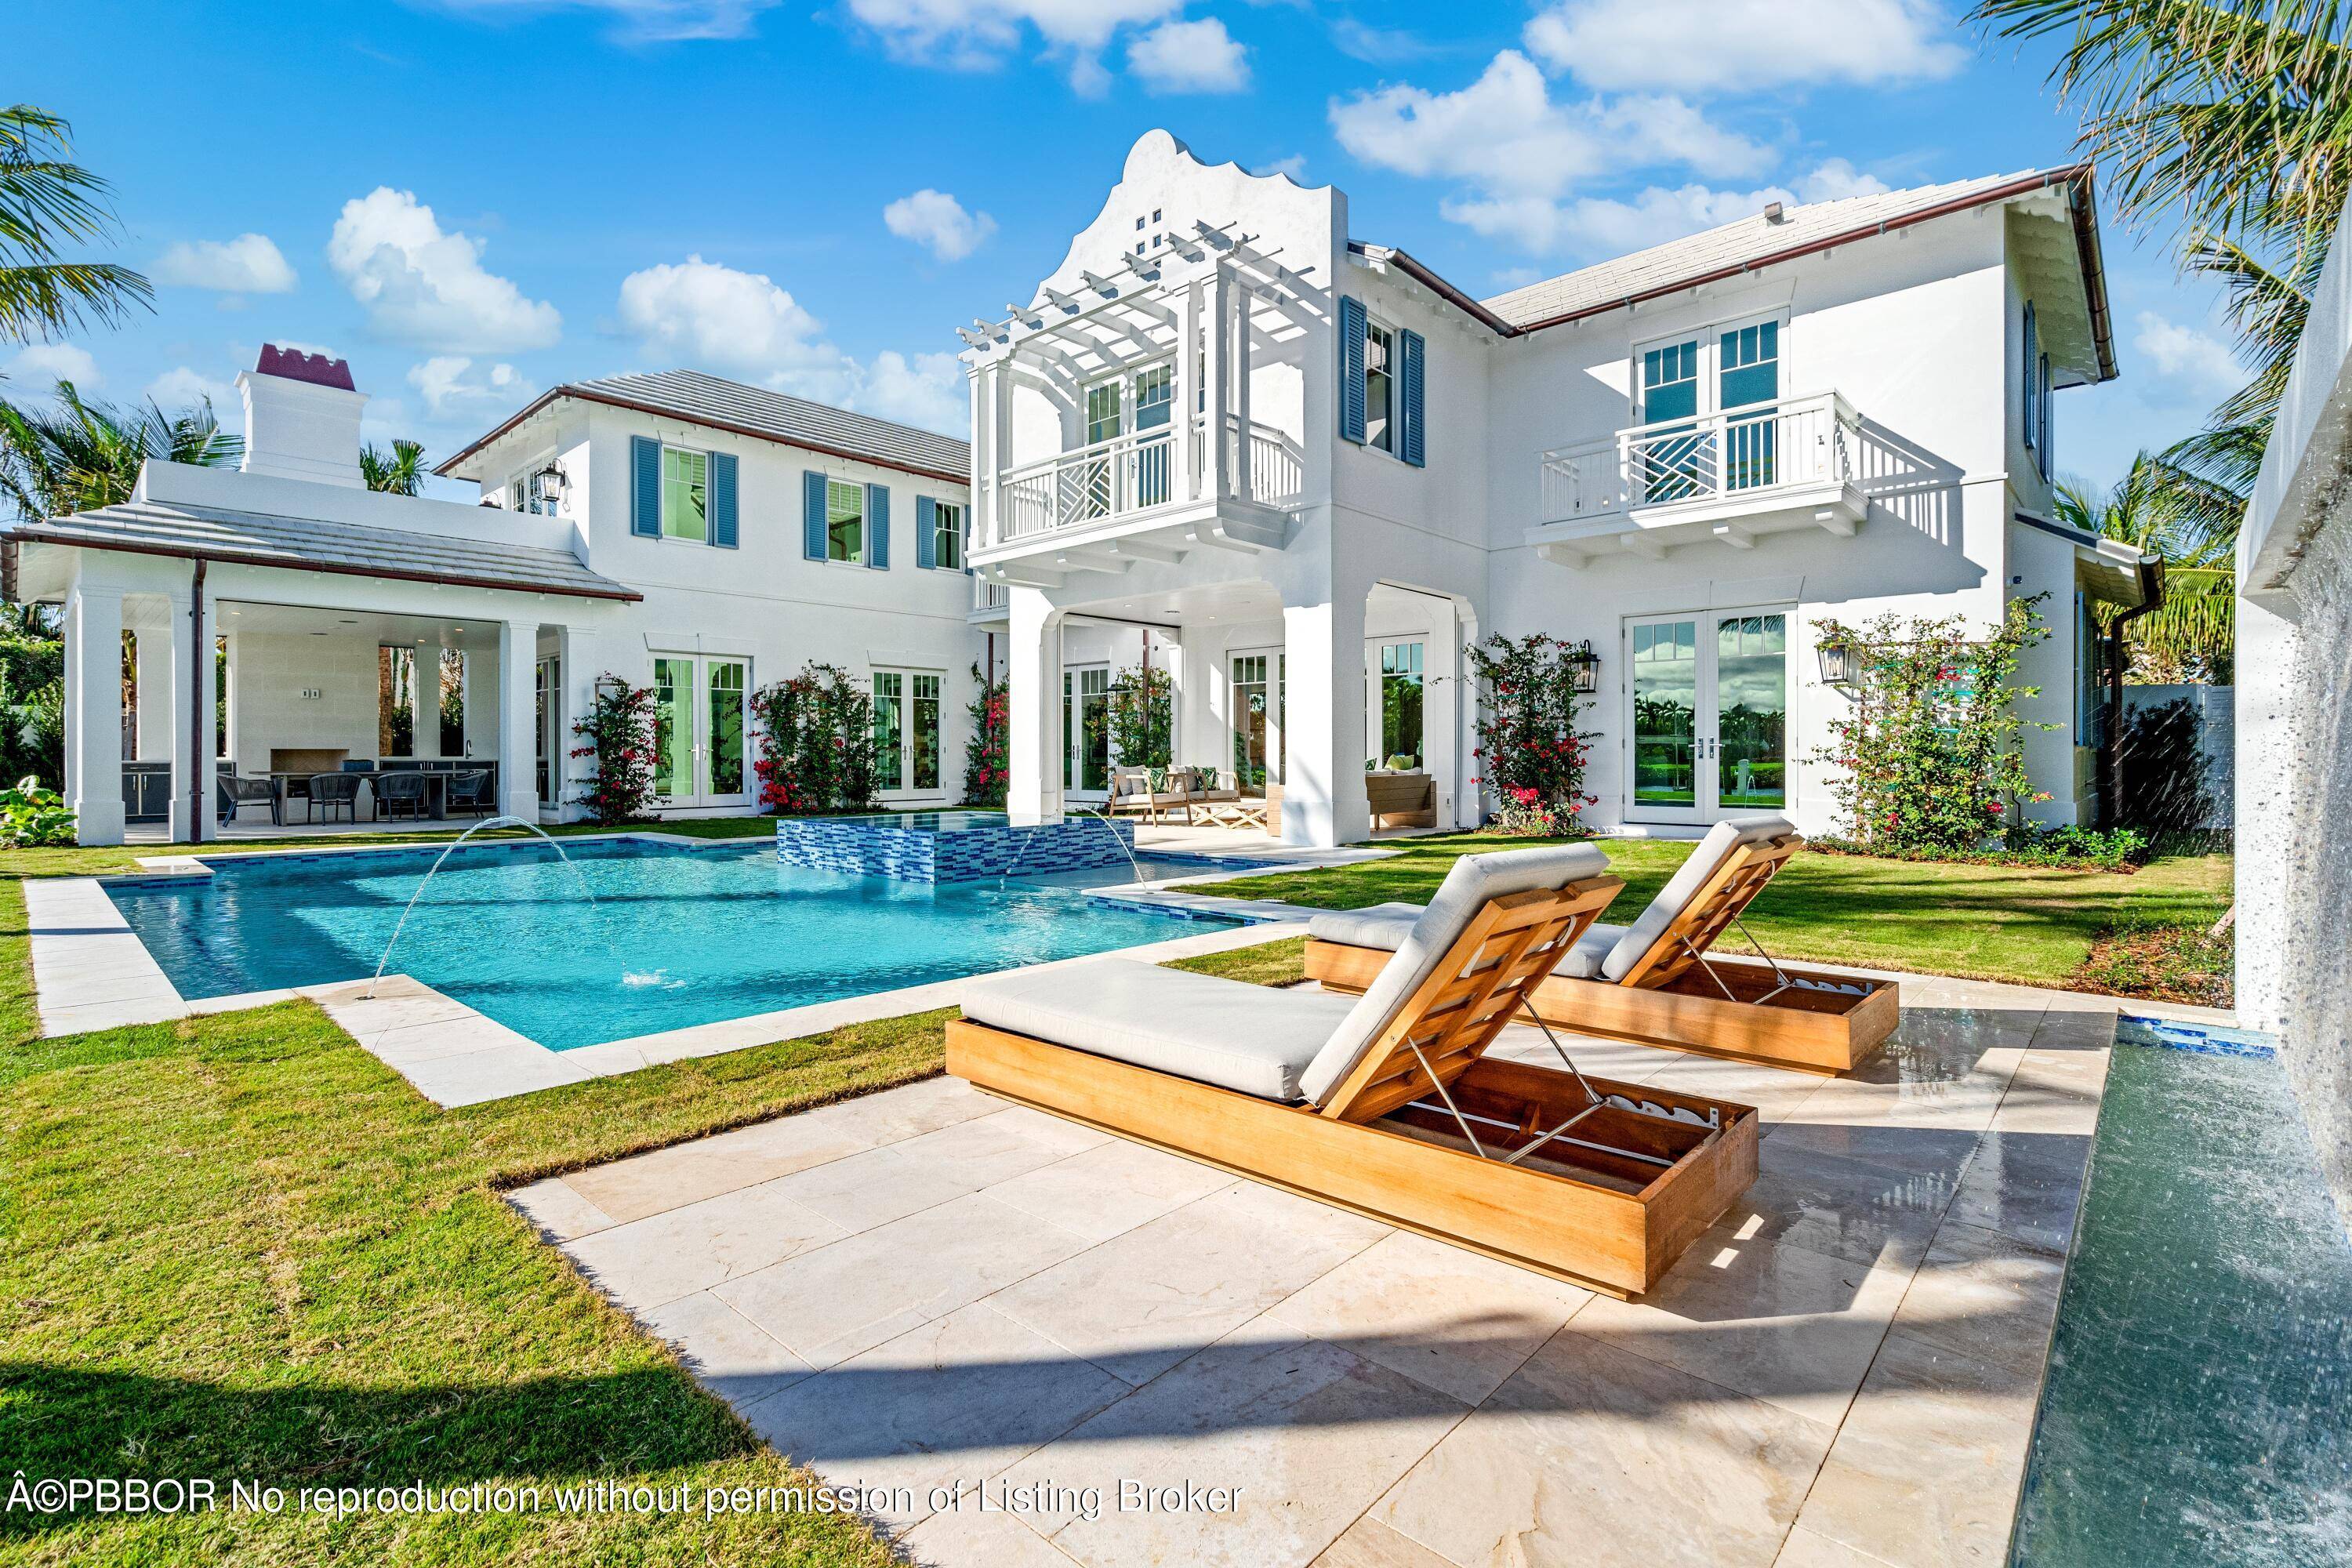 Welcome to 584 Island Drive, the premier new construction home on Everglades Island in Palm Beach.